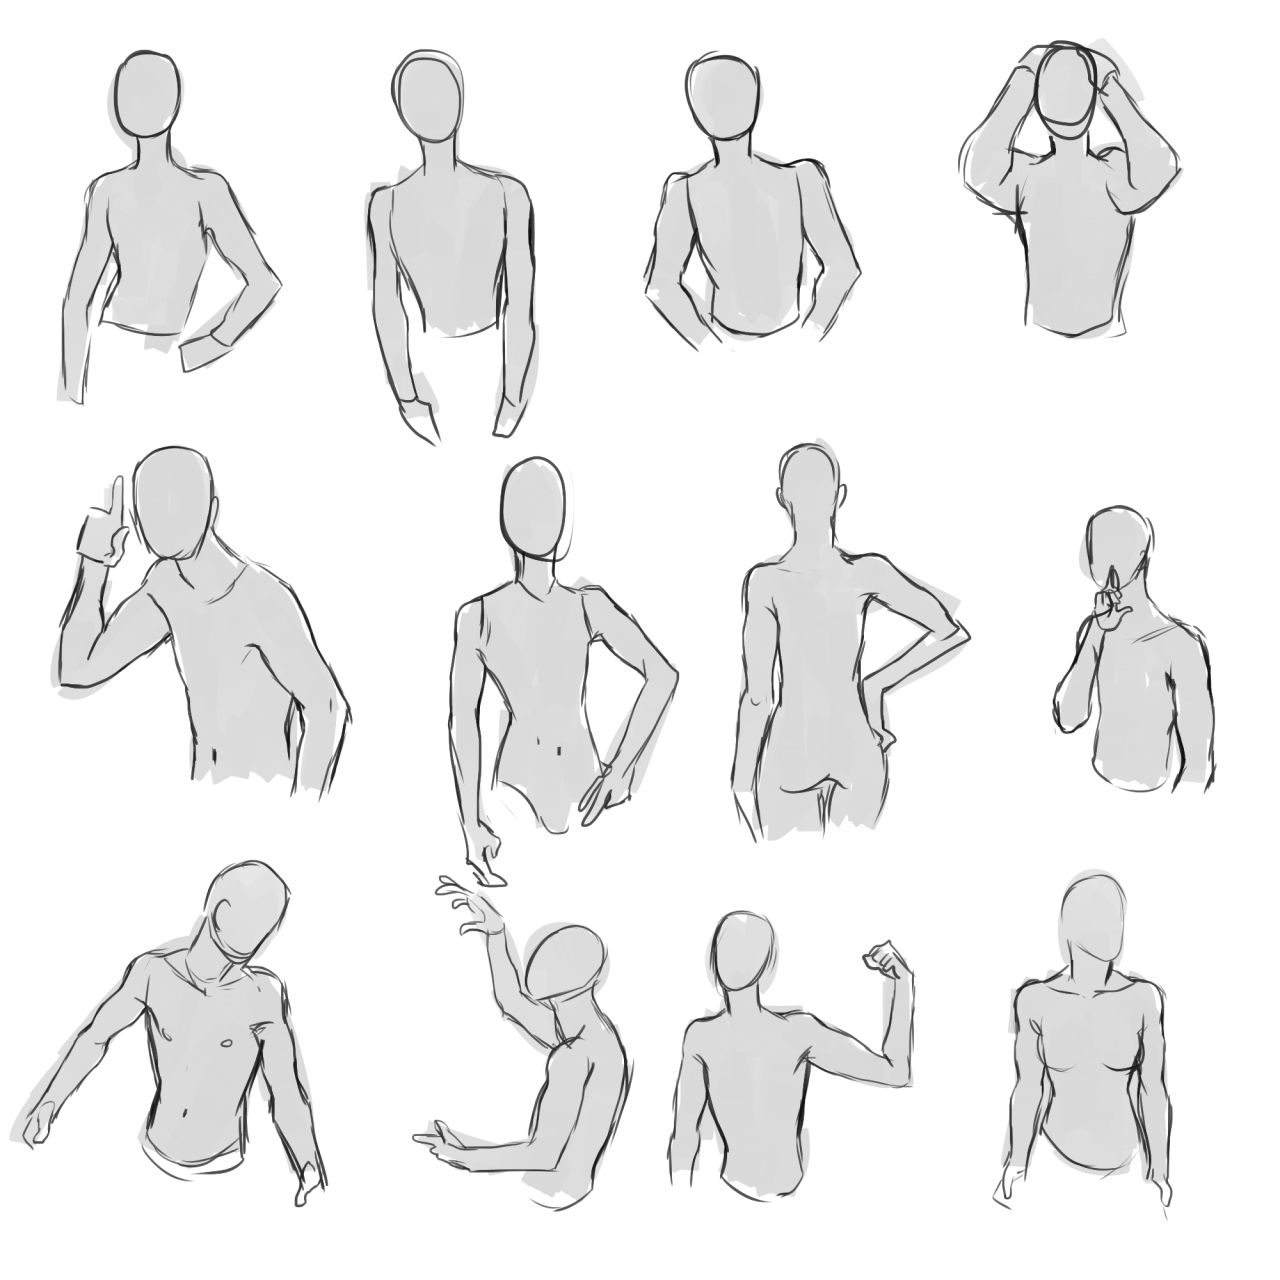 1280x1280 reference crossed drawing arms - Arms Crossed Drawing Ref...